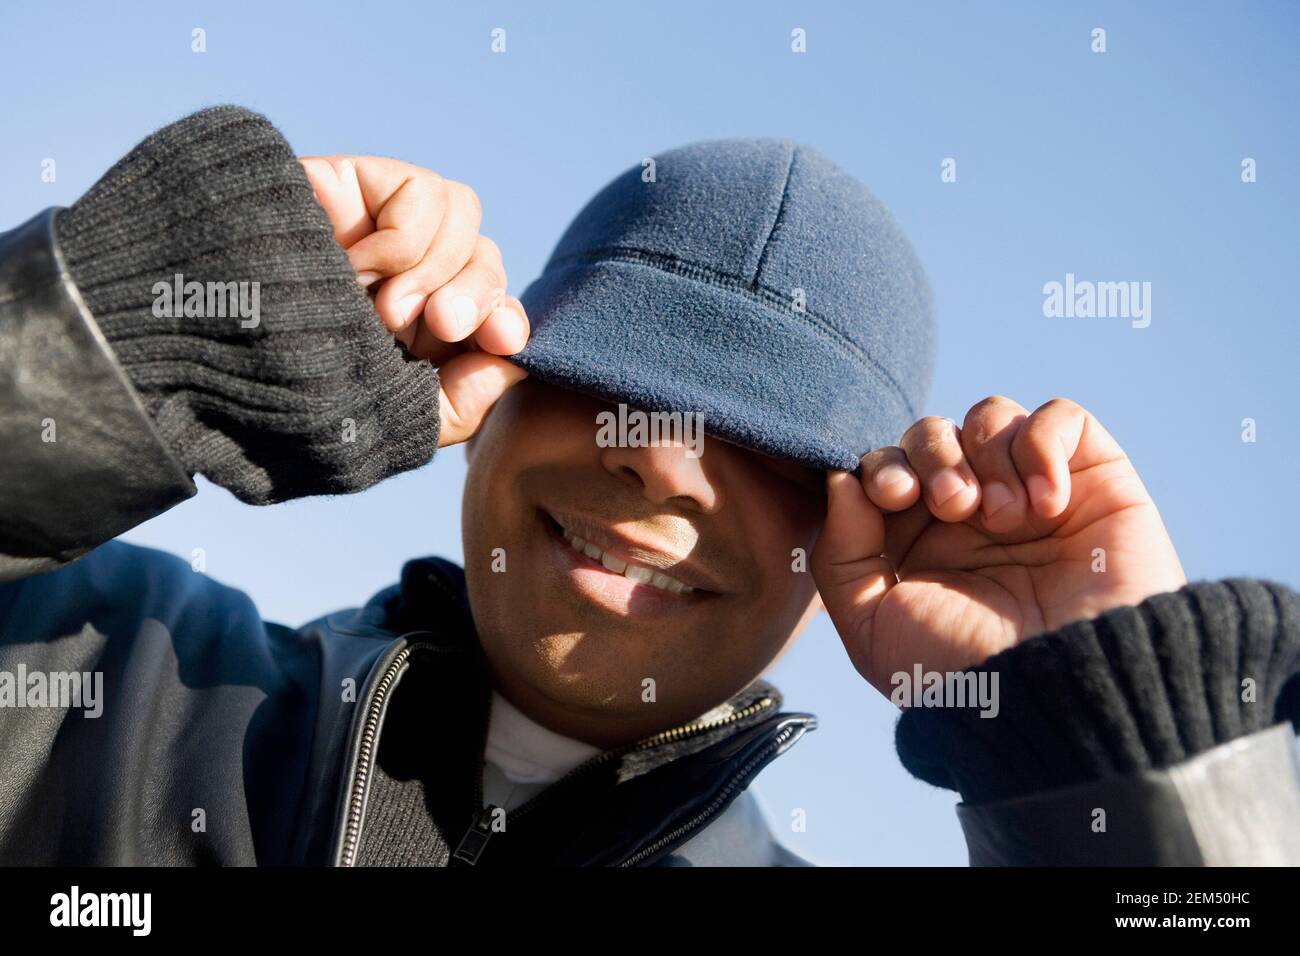 Low angle view of a man adjusting his hat and smiling Stock Photo